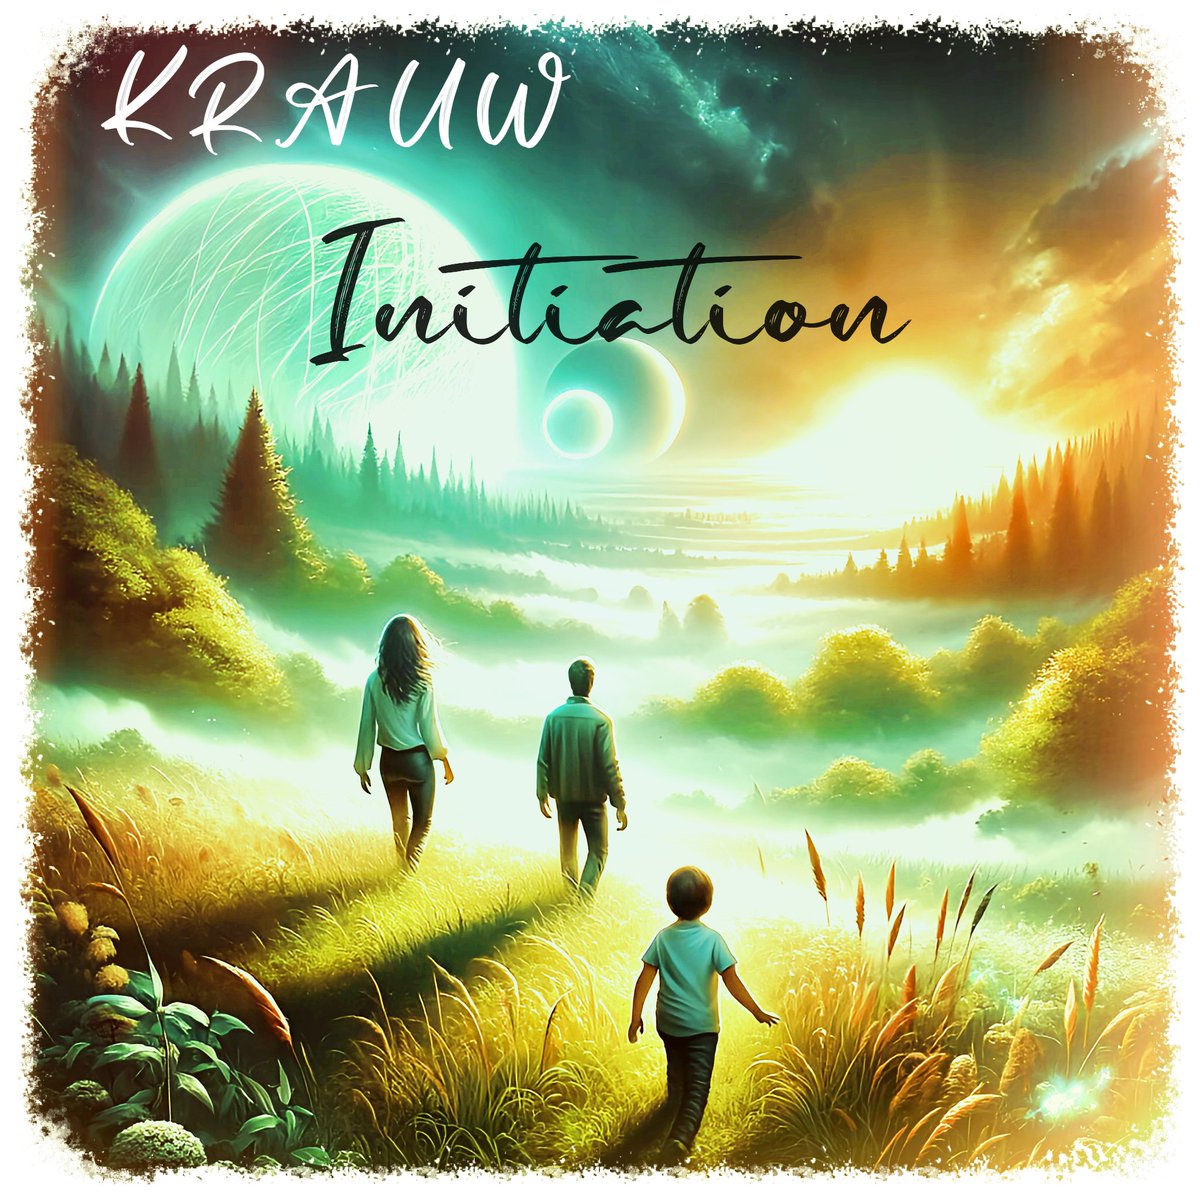 Listen to the album 'Initiation' and appreciate the insightful debut from the promising @KrauwZic
#indiedockmusicblog #albumreview #electronic #experimental #avantgarde #cinematic

indiedockmusicblog.co.uk/?p=22666&fbcli…